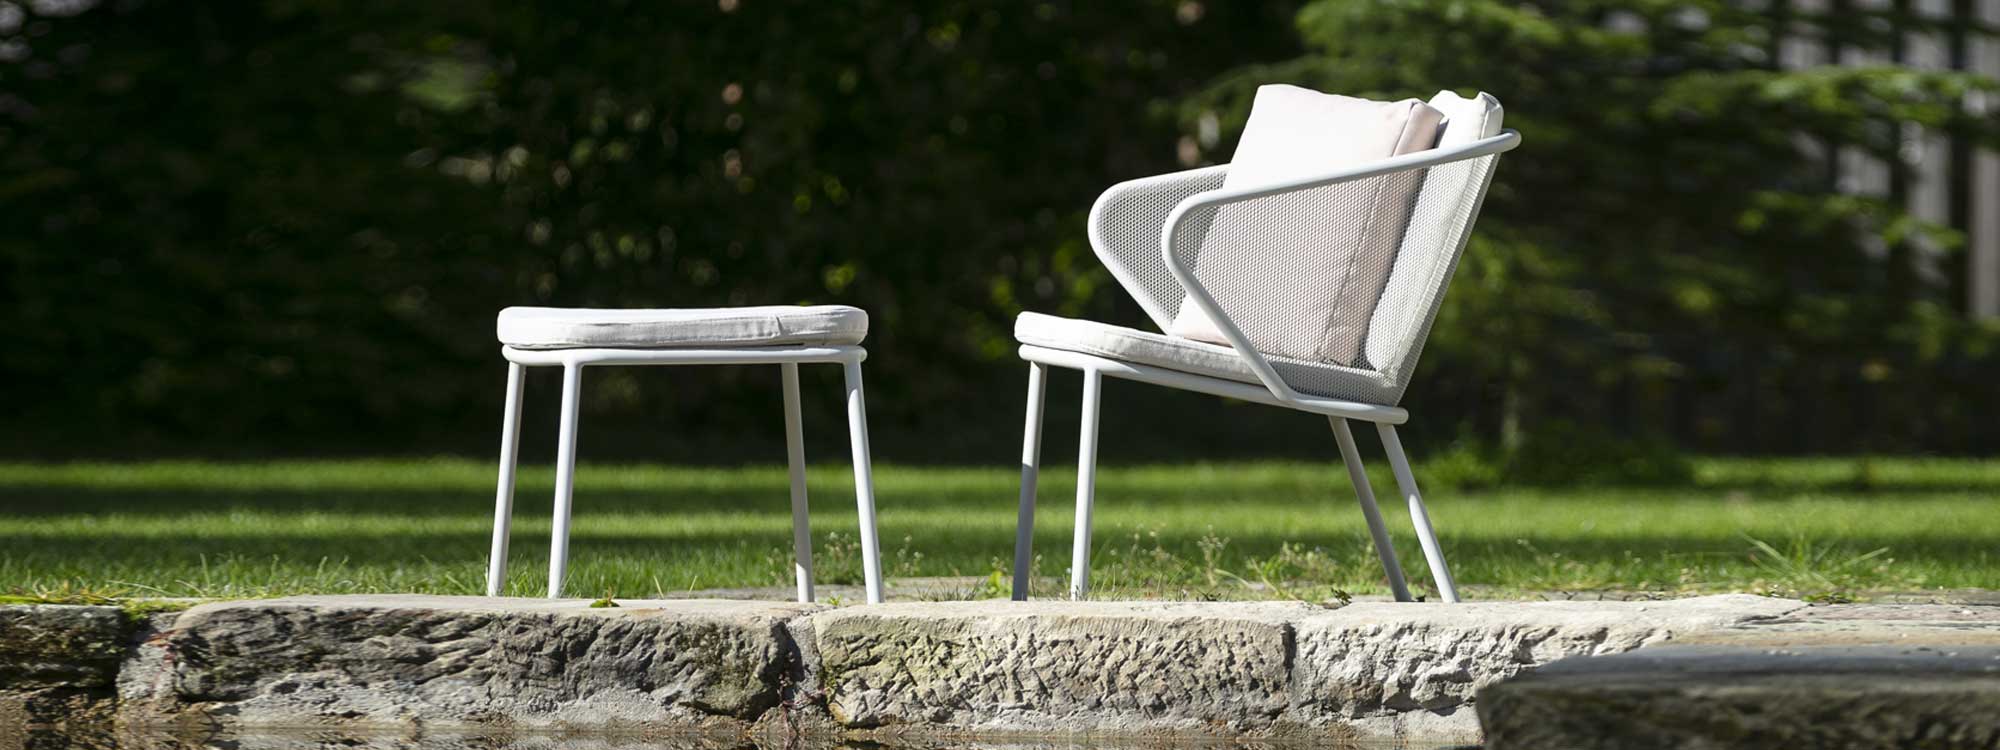 Image showing naturally inspired design of Condor garden chair's winged arms by Studio Segers for Todus